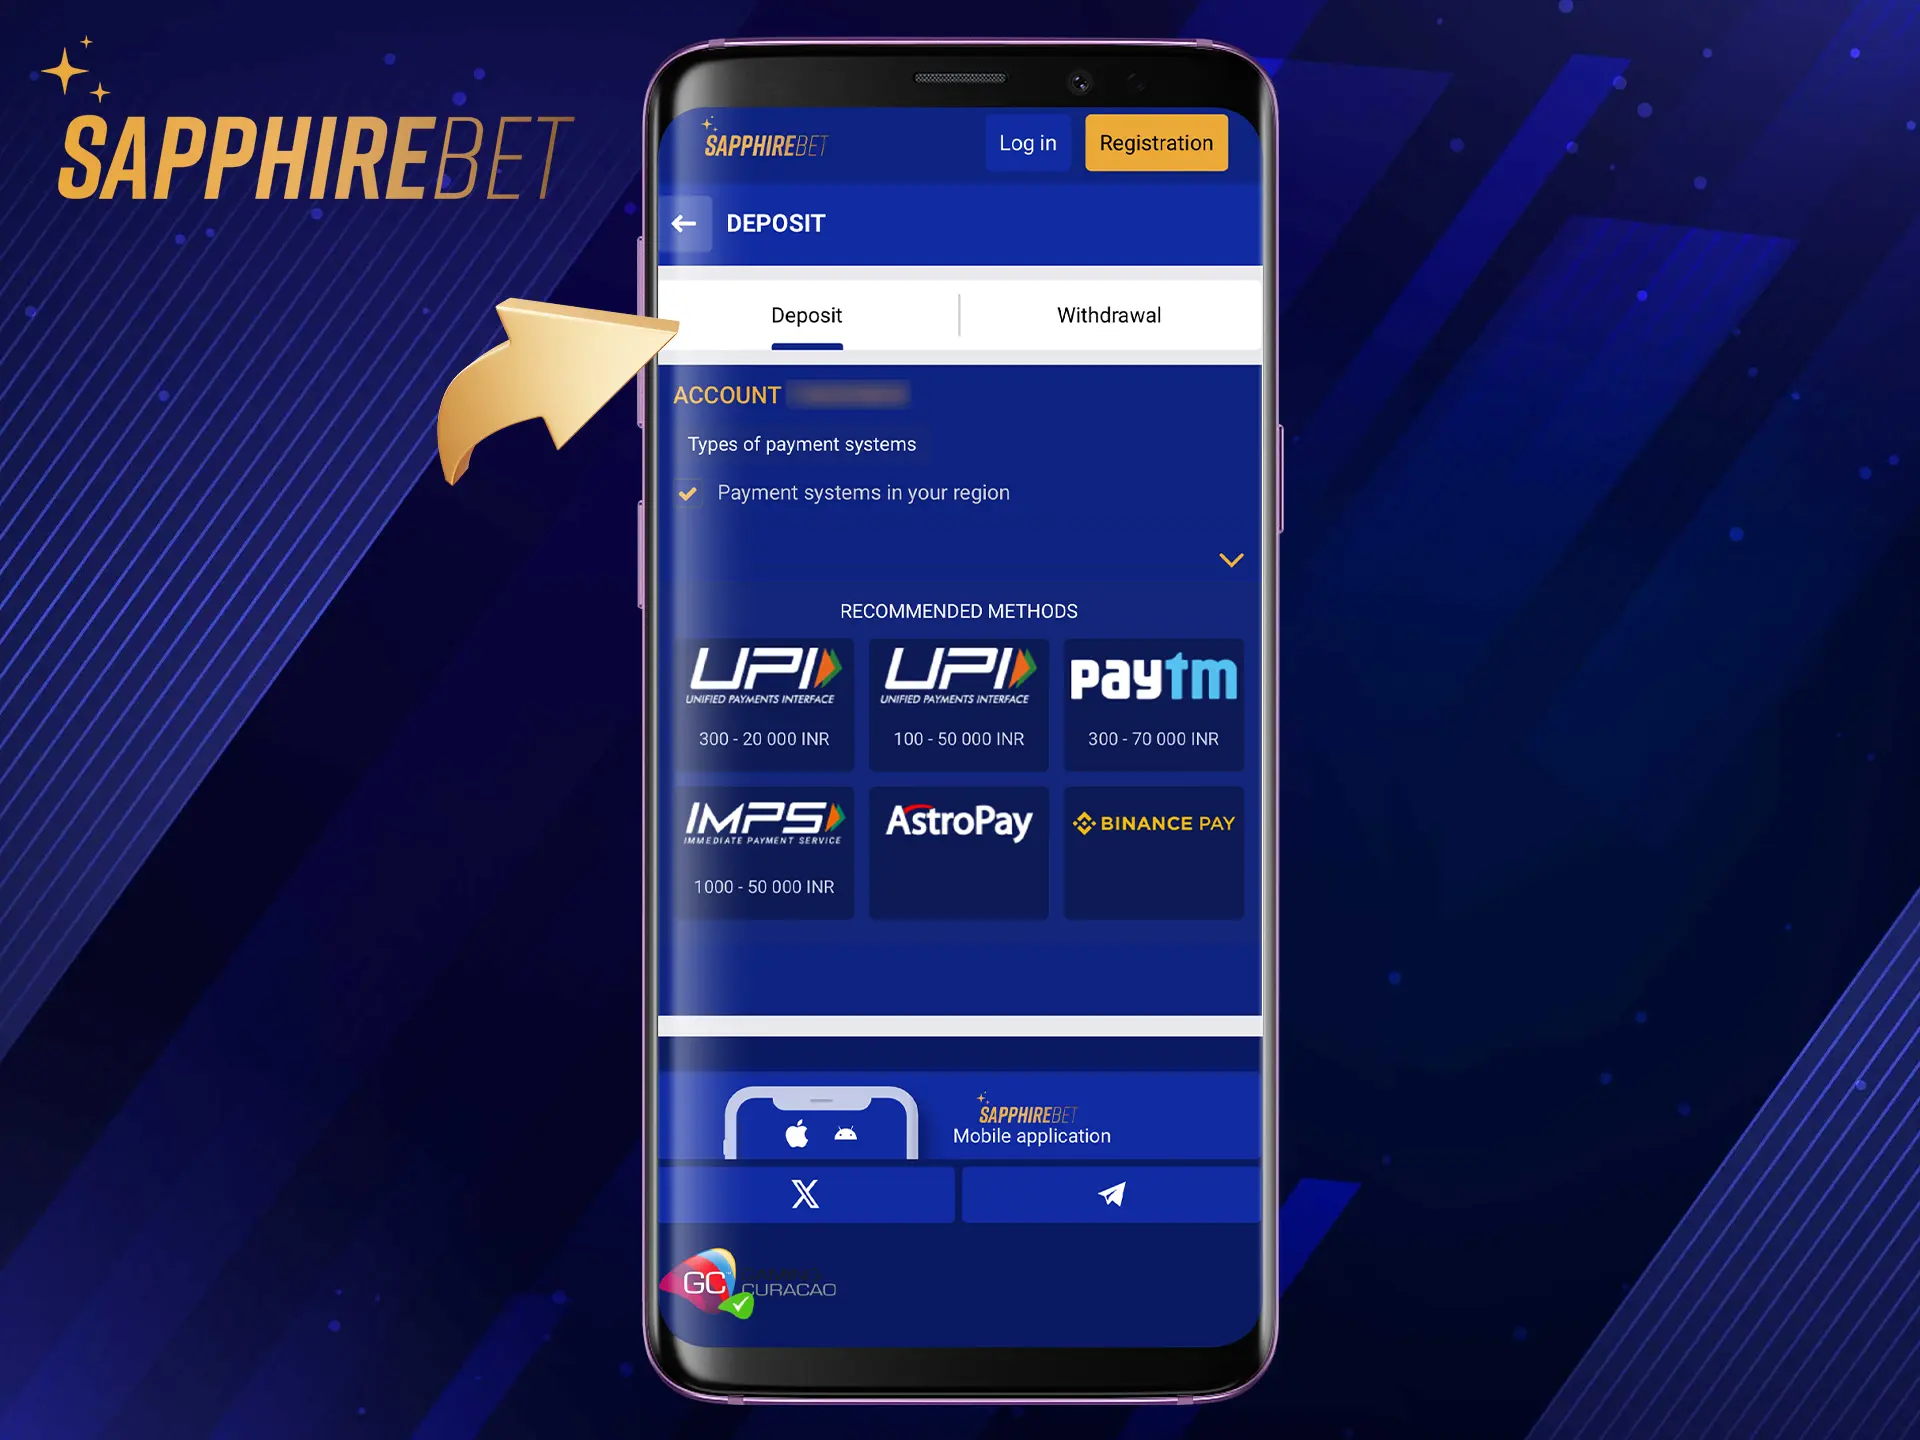 Choose how to deposit to your SapphireBet account.